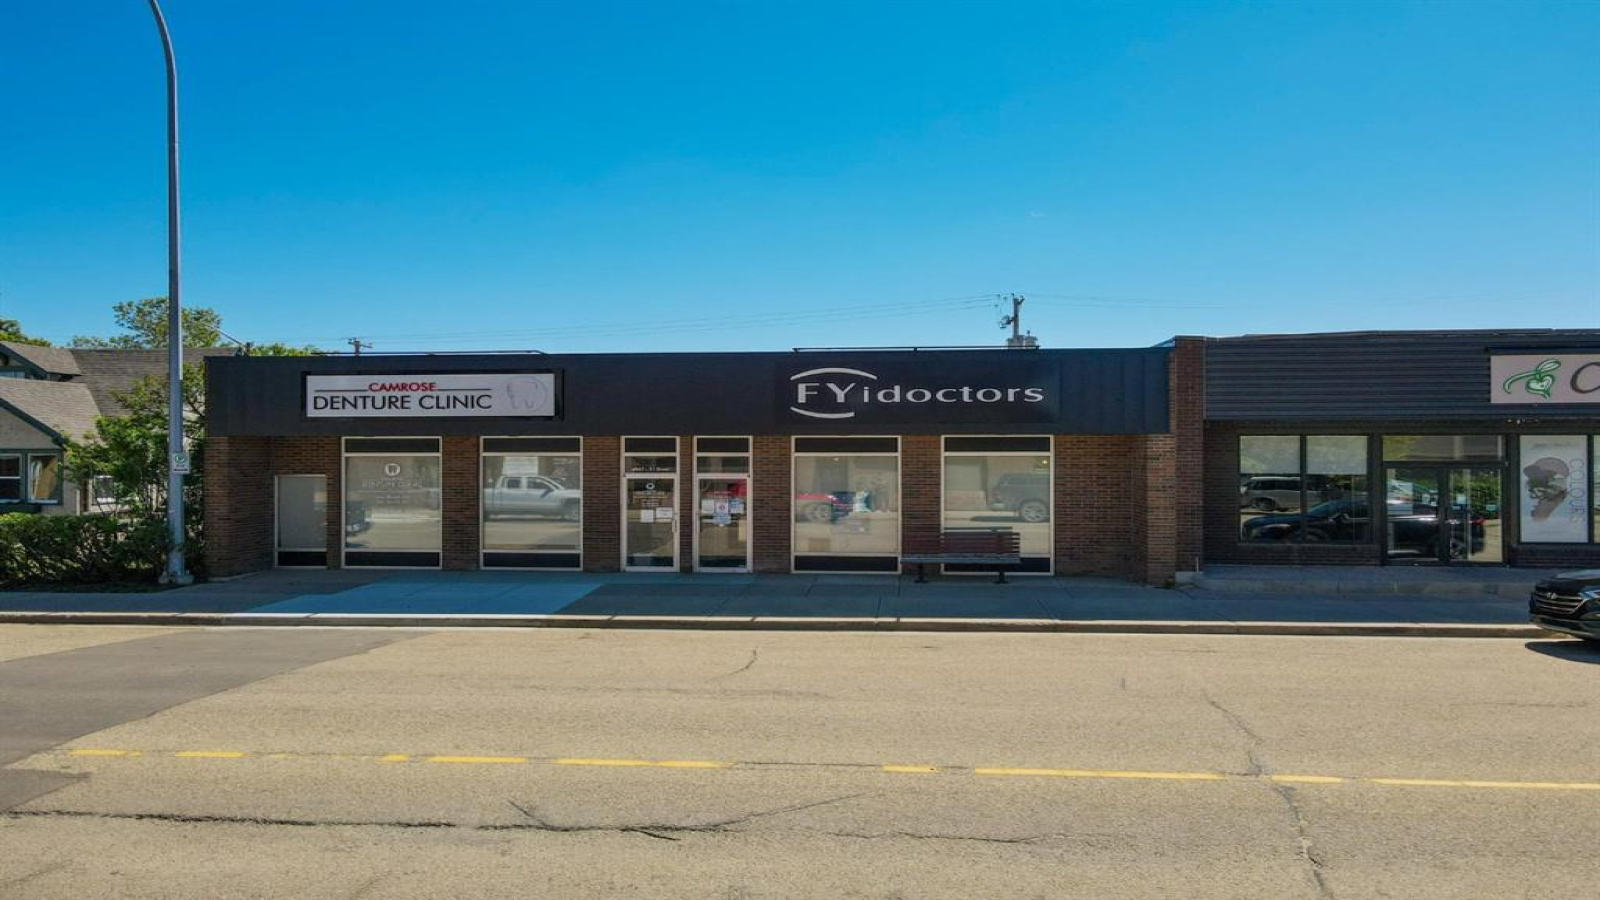 4867 51 Street, Camrose, Alberta t4v 1s2, ,Commercial,For Lease,51,A1119726